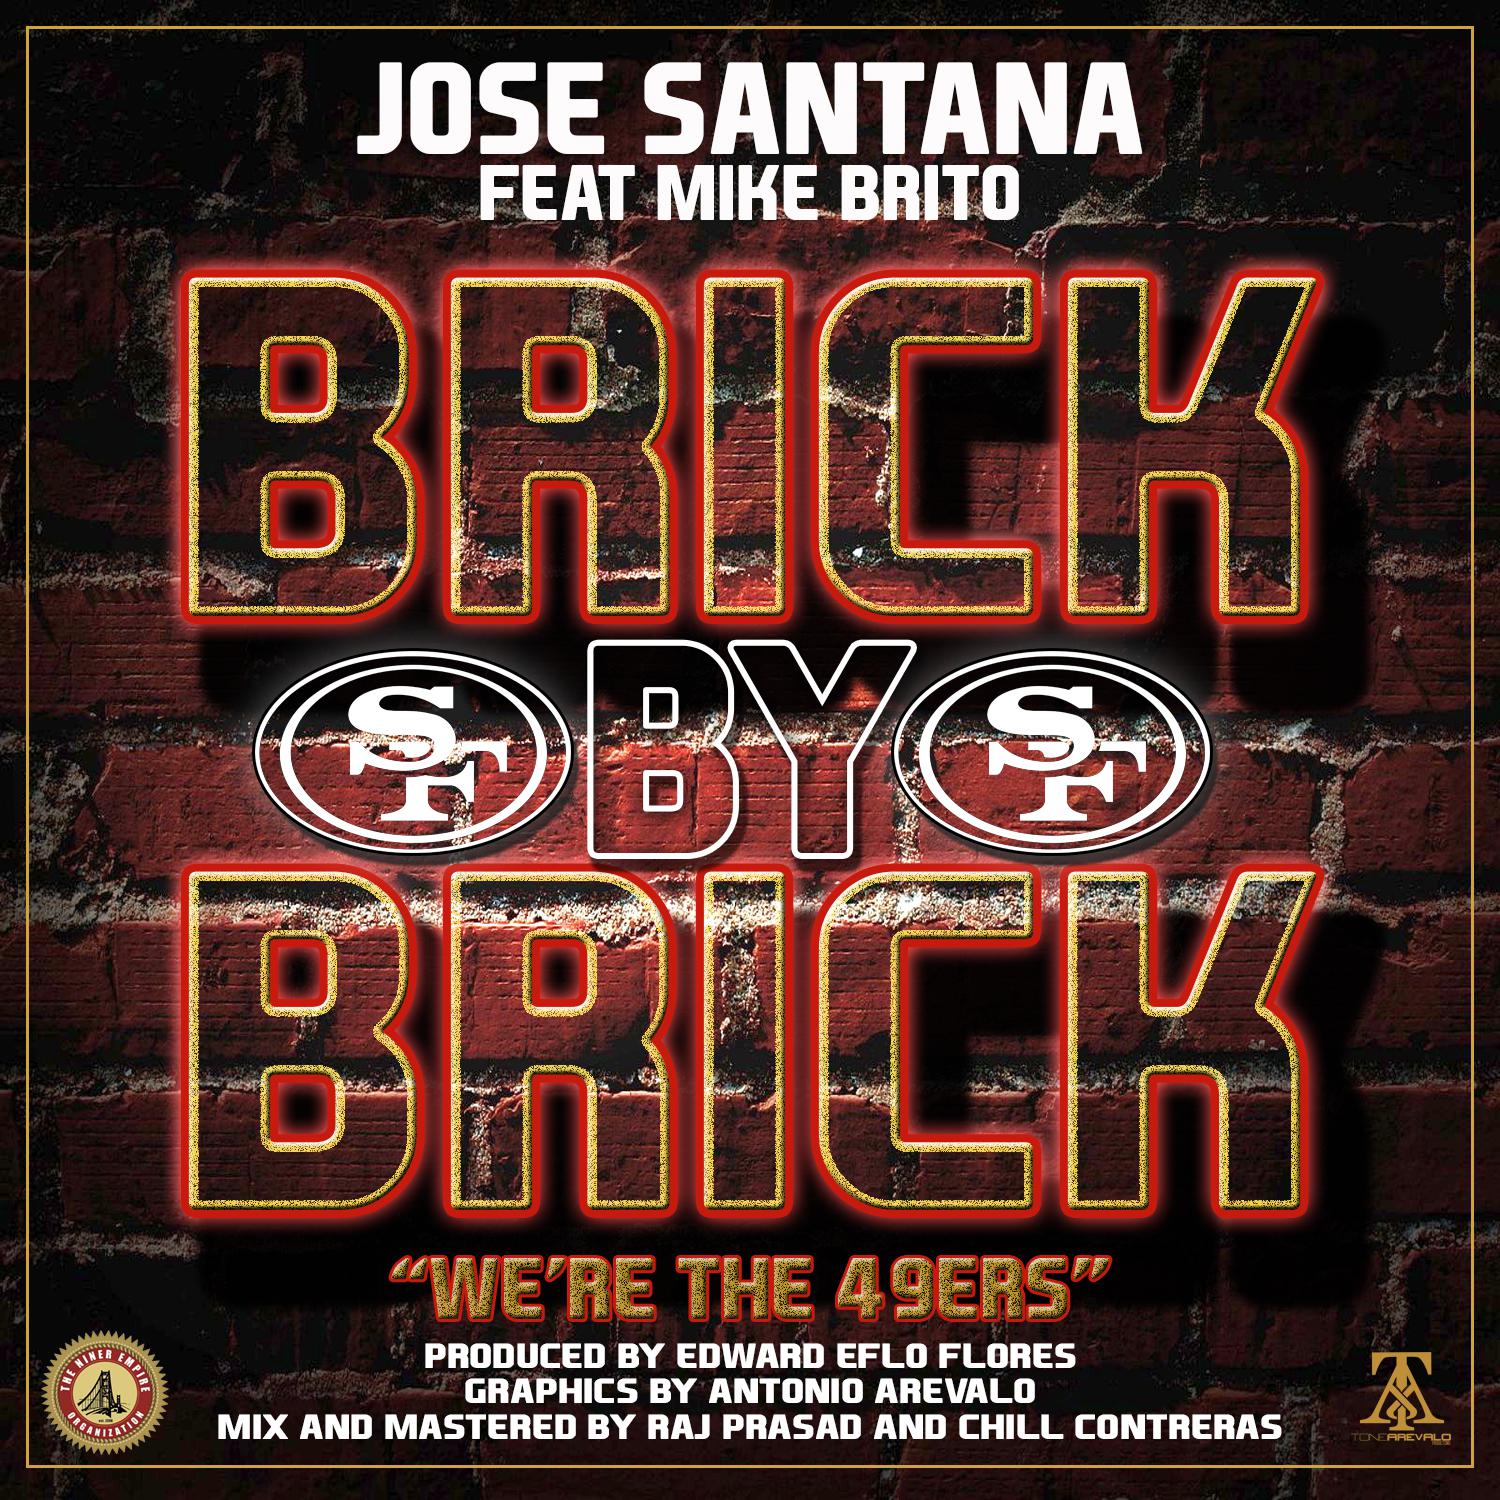 Brick By Brick: We're the 49ers